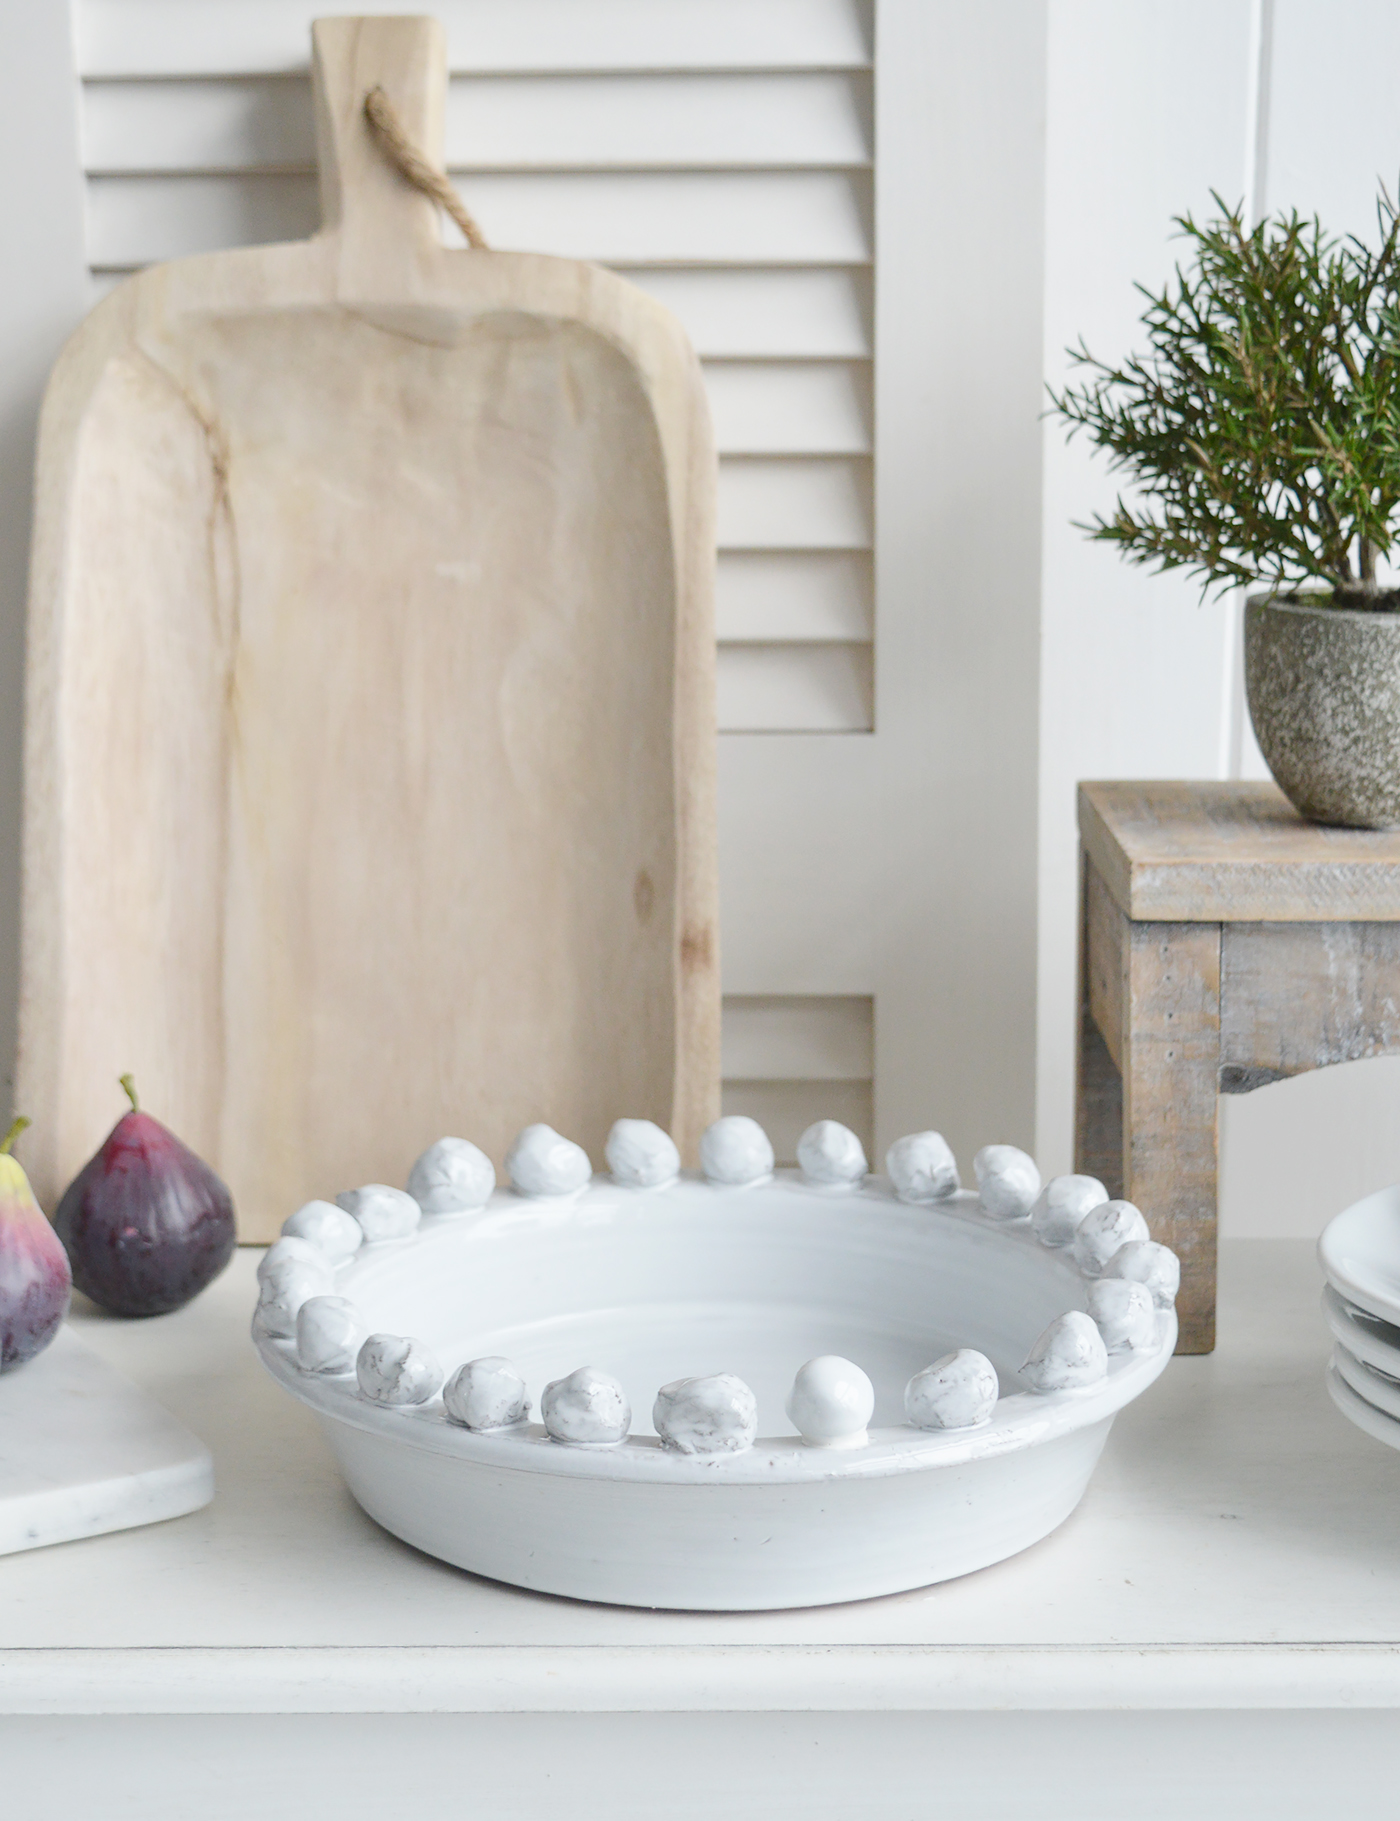 White ceramic fruit bowl with bobbles with realistic artificial decorative figs to create a forever dispaly for your New England coastal and country home interior